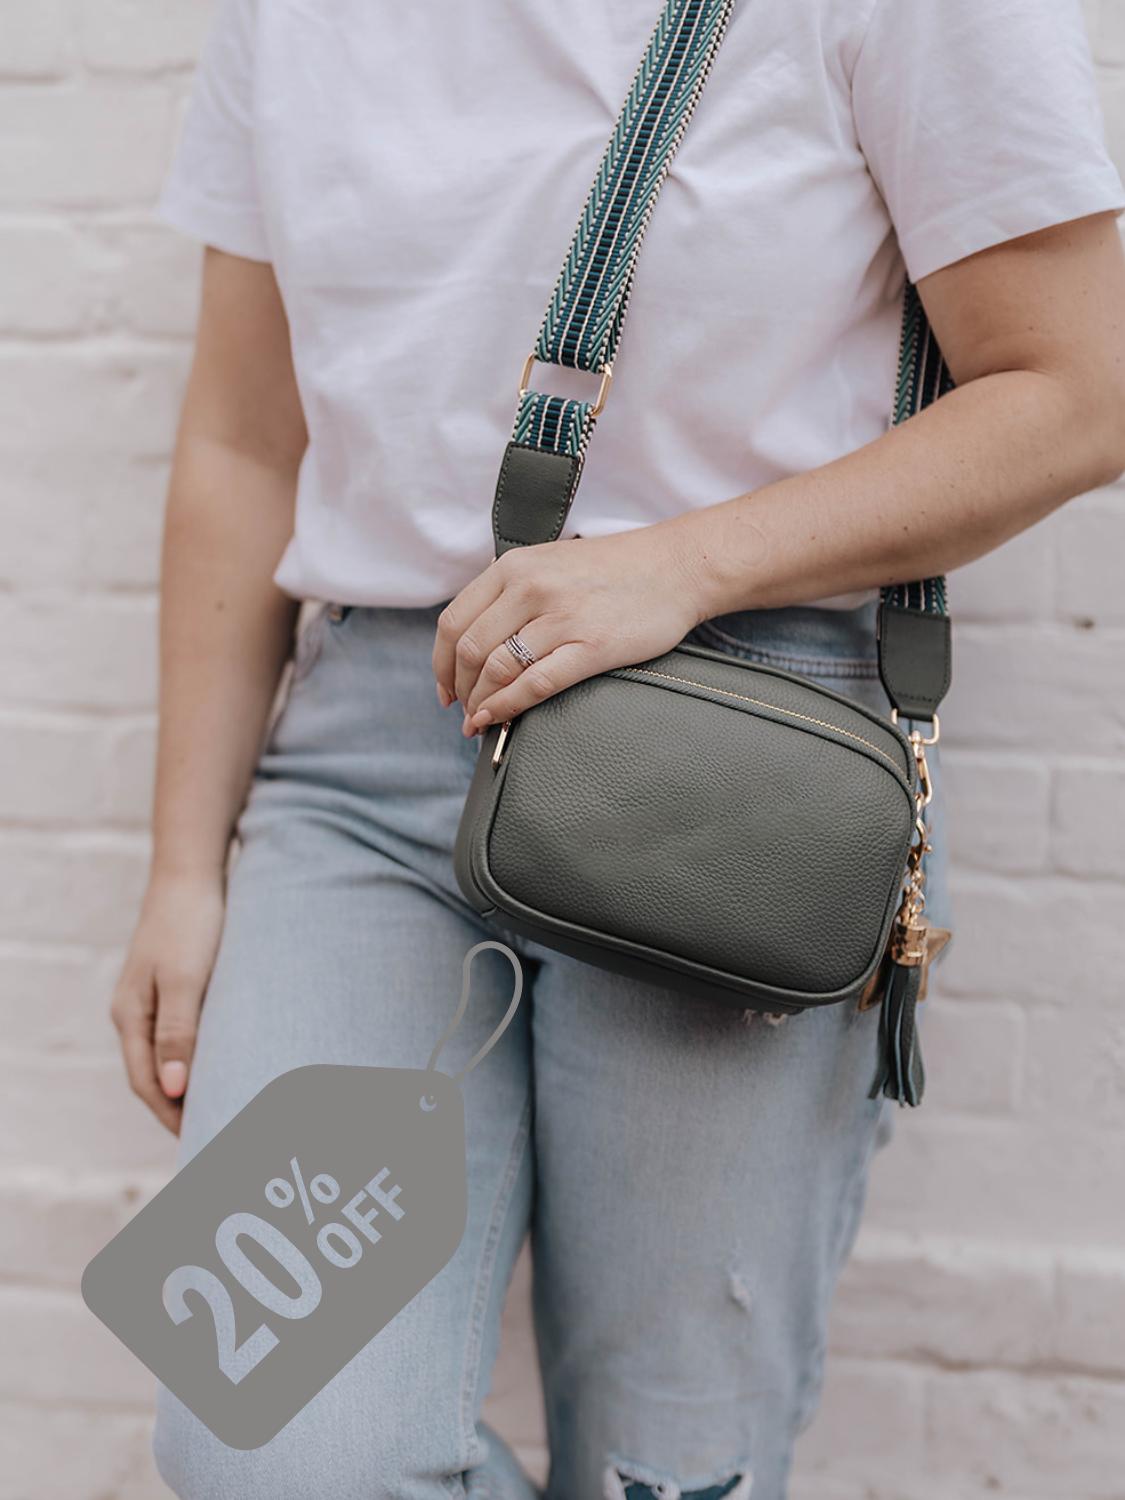 Save 20% on our Azure Green Downton Bag!